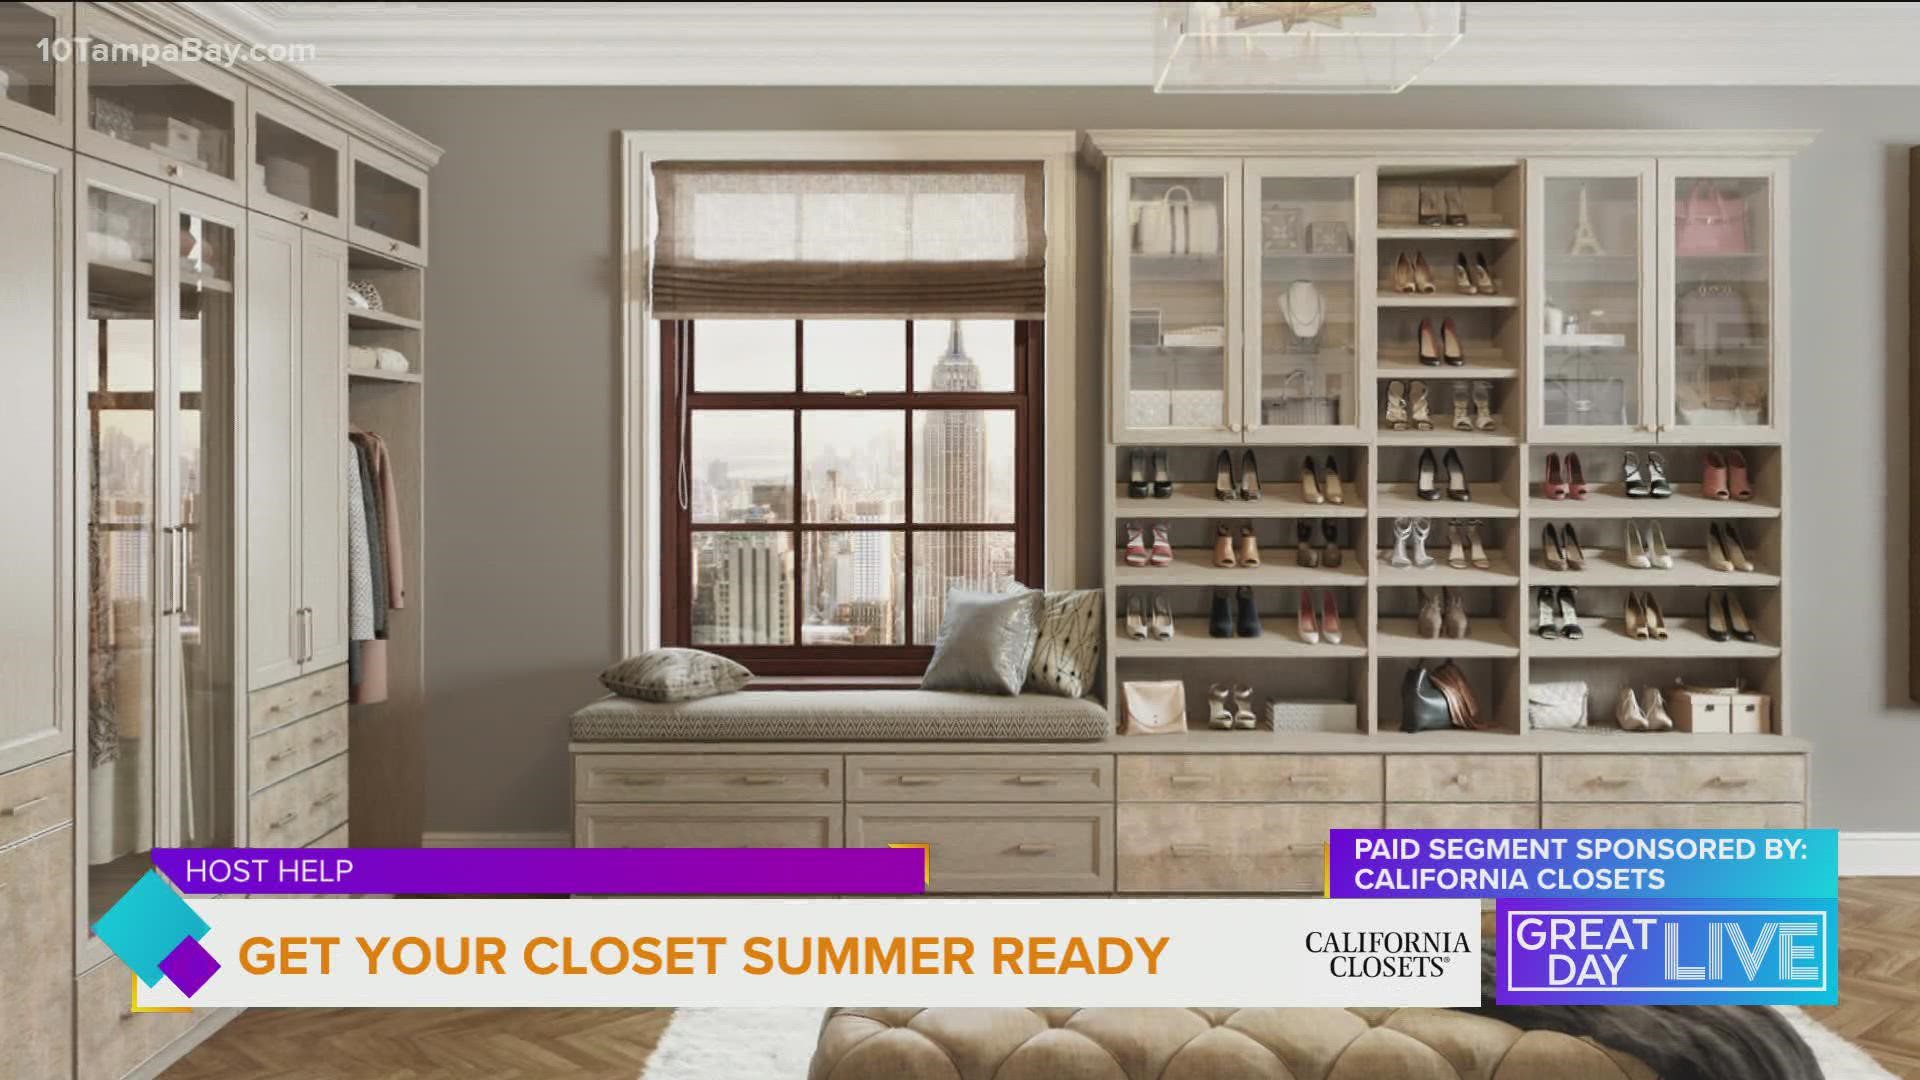 California Closets shares 7 steps to get your closet ready for the summer